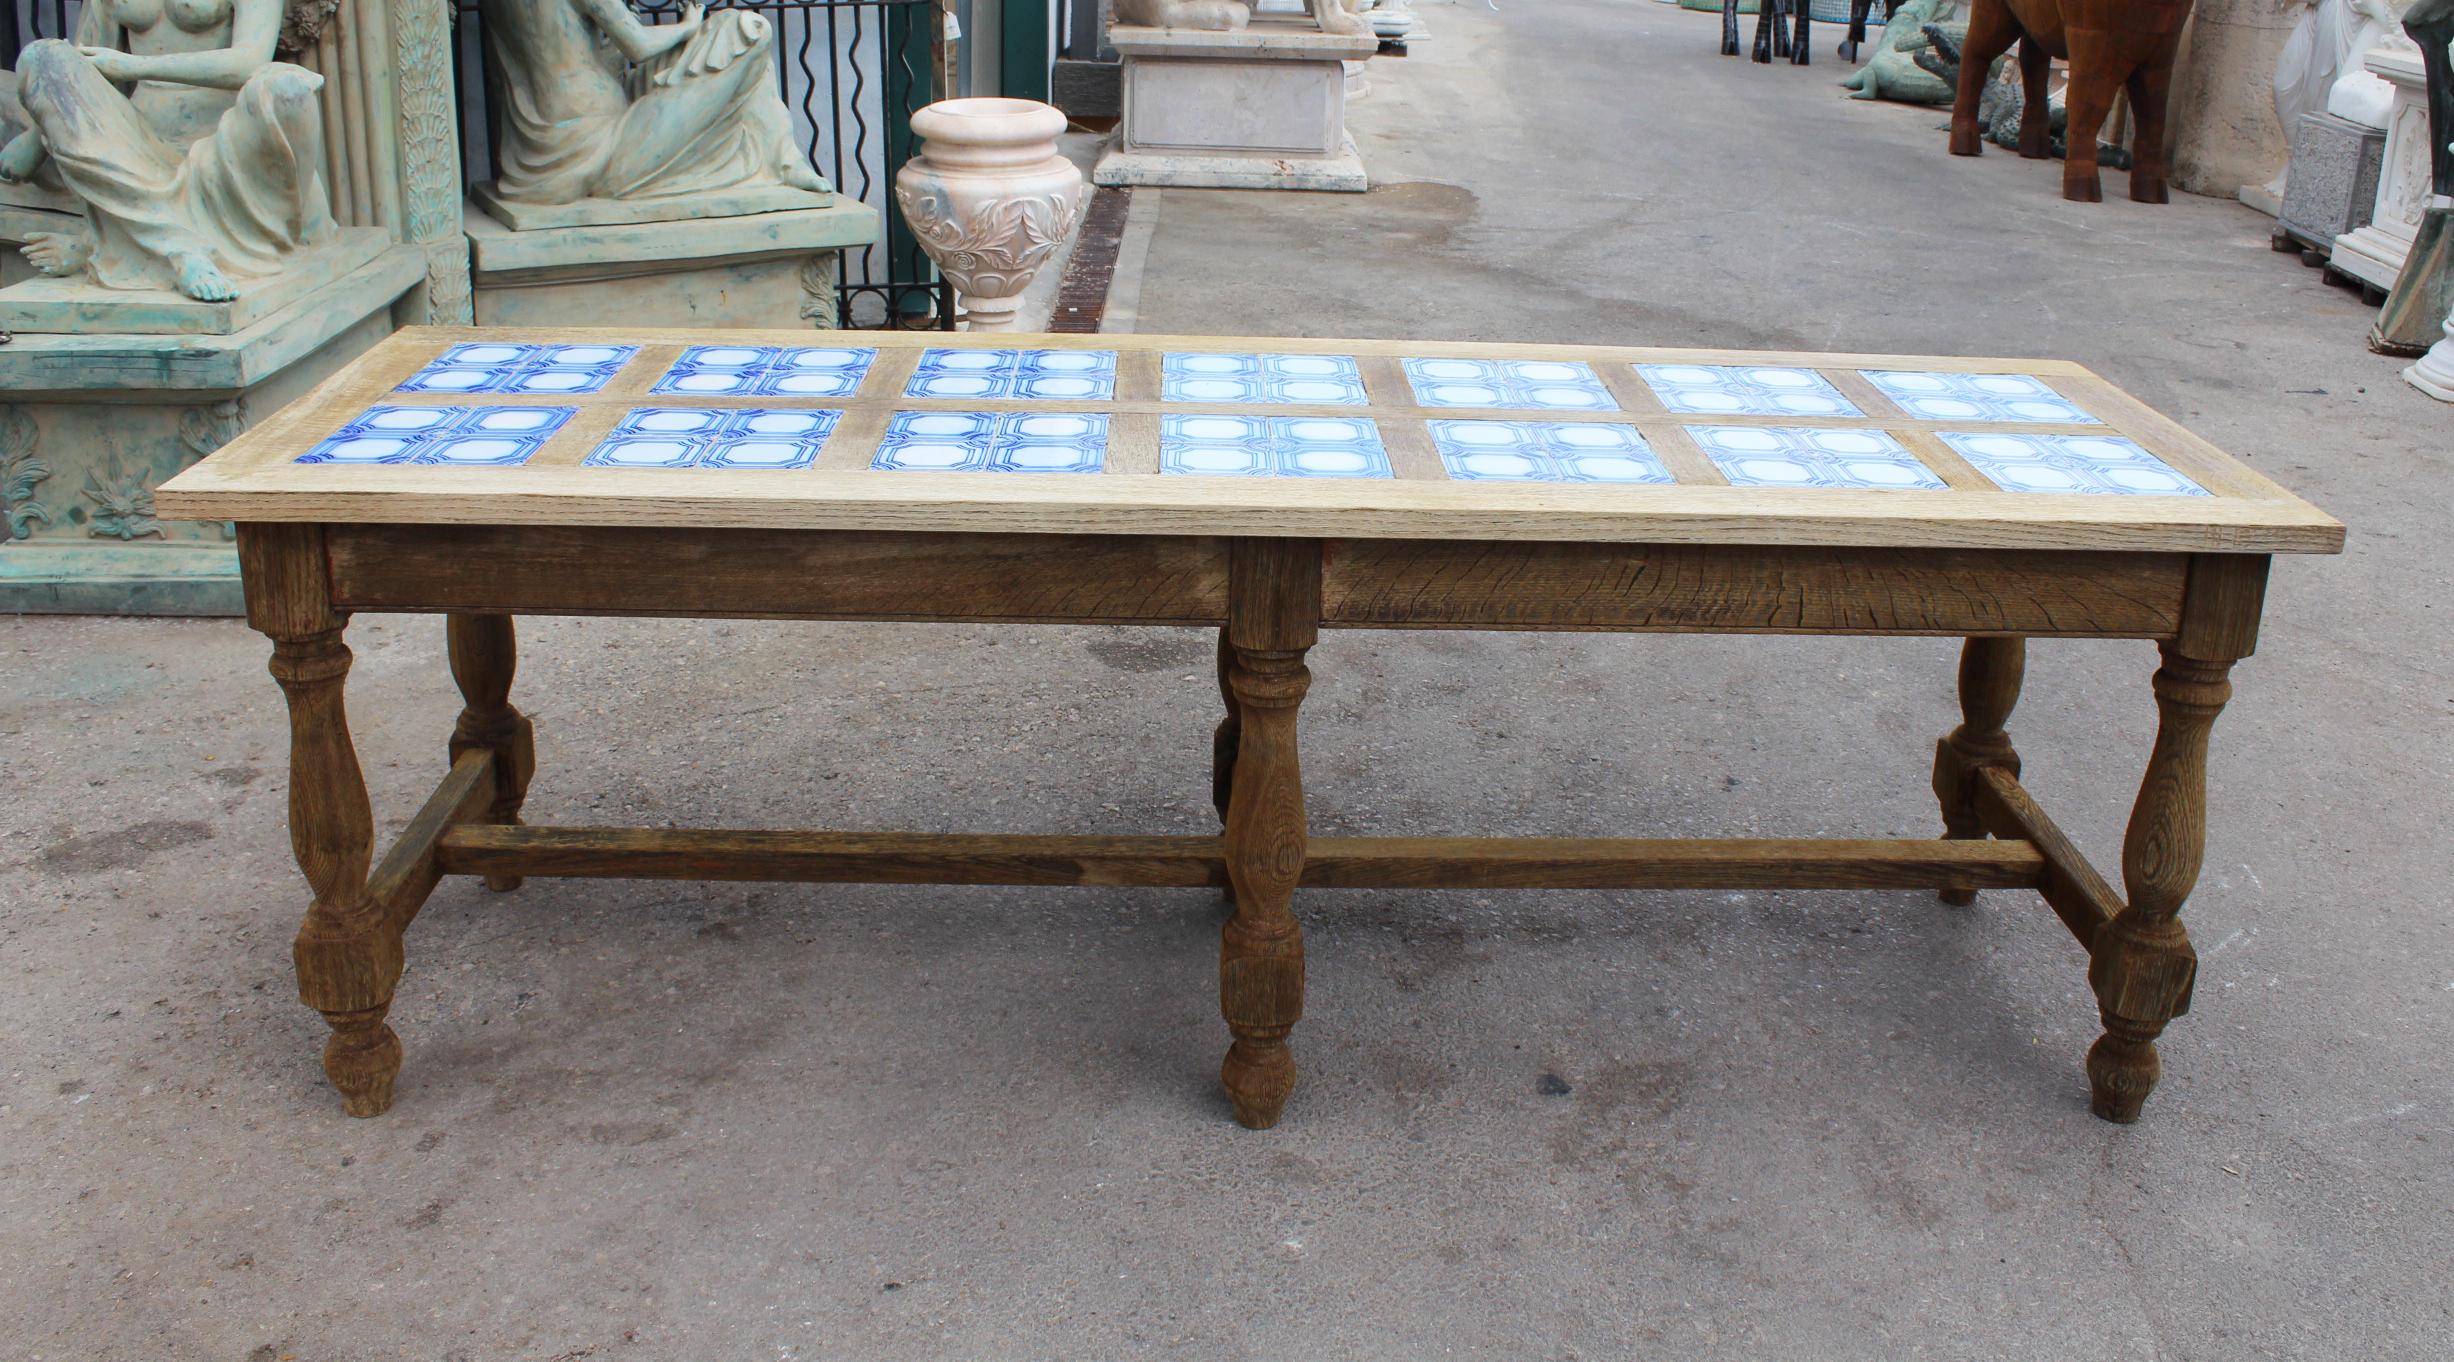 1980s Spanish Kitchen Table with Glazed Ceramic Tiled Top 1